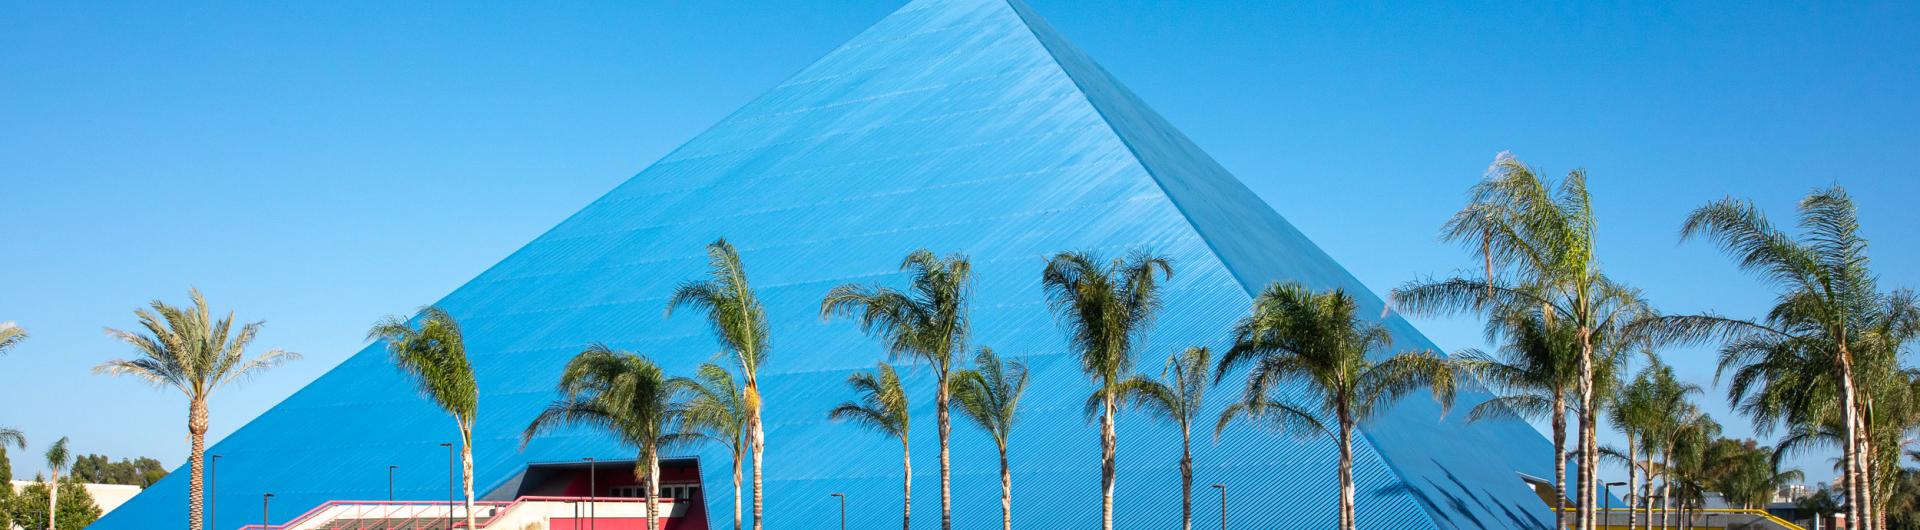 Pyramid with palm trees in forefront